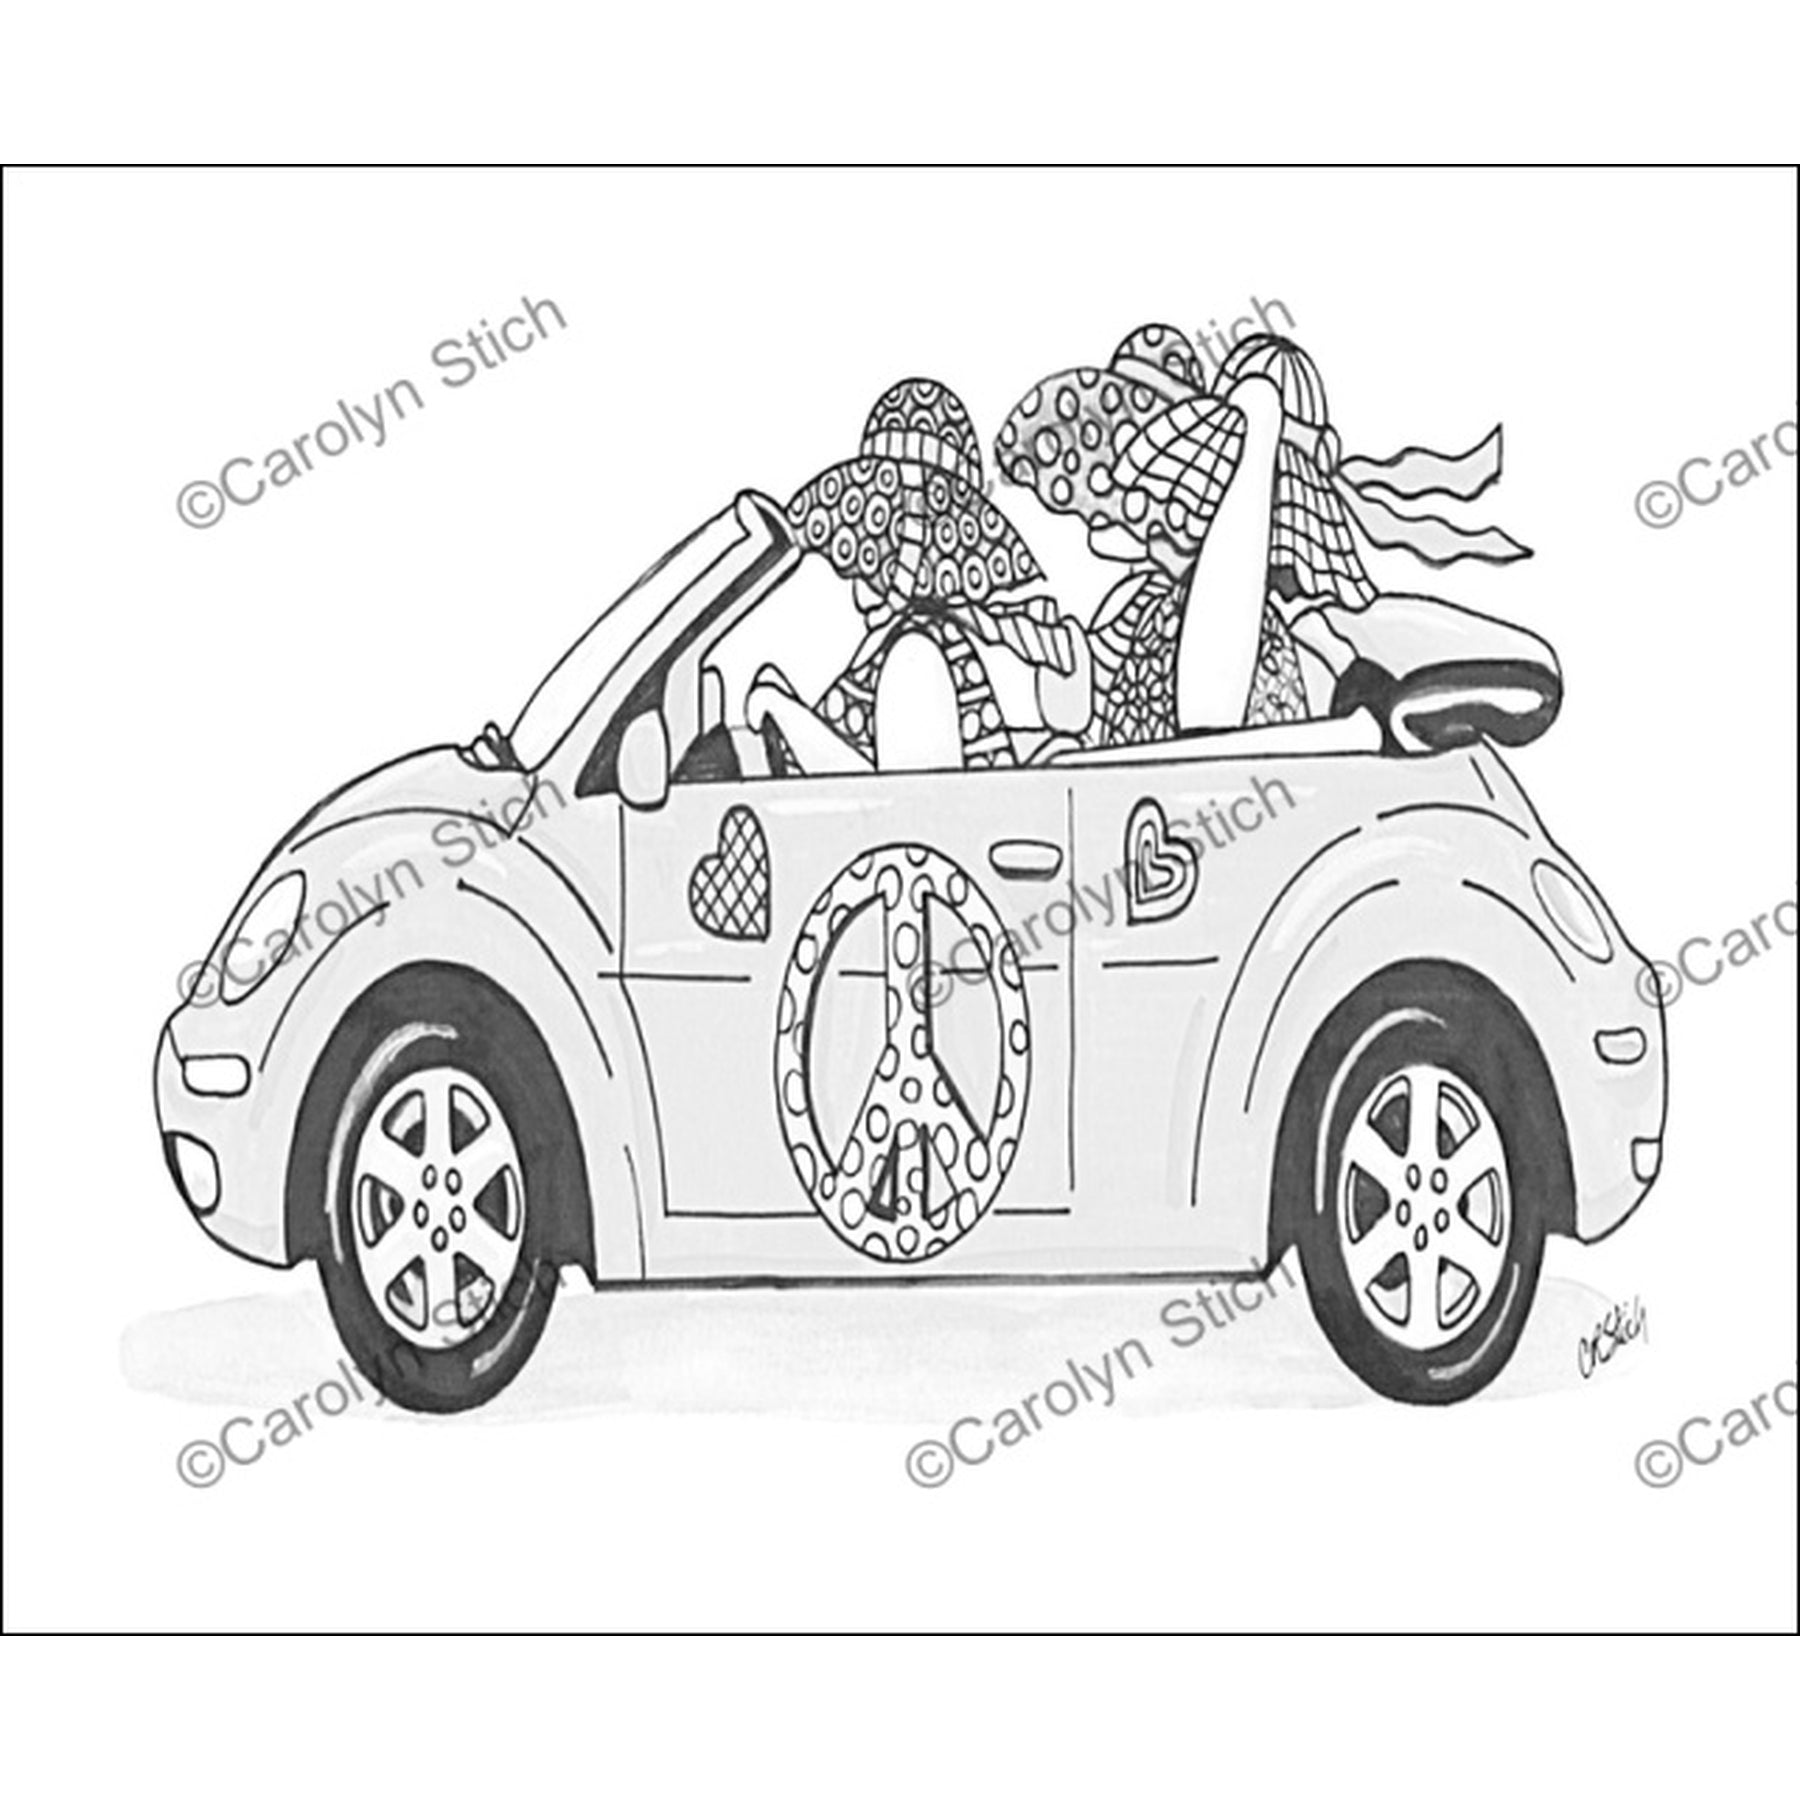 The Girls Cruisin in Style, rug hooking pattern